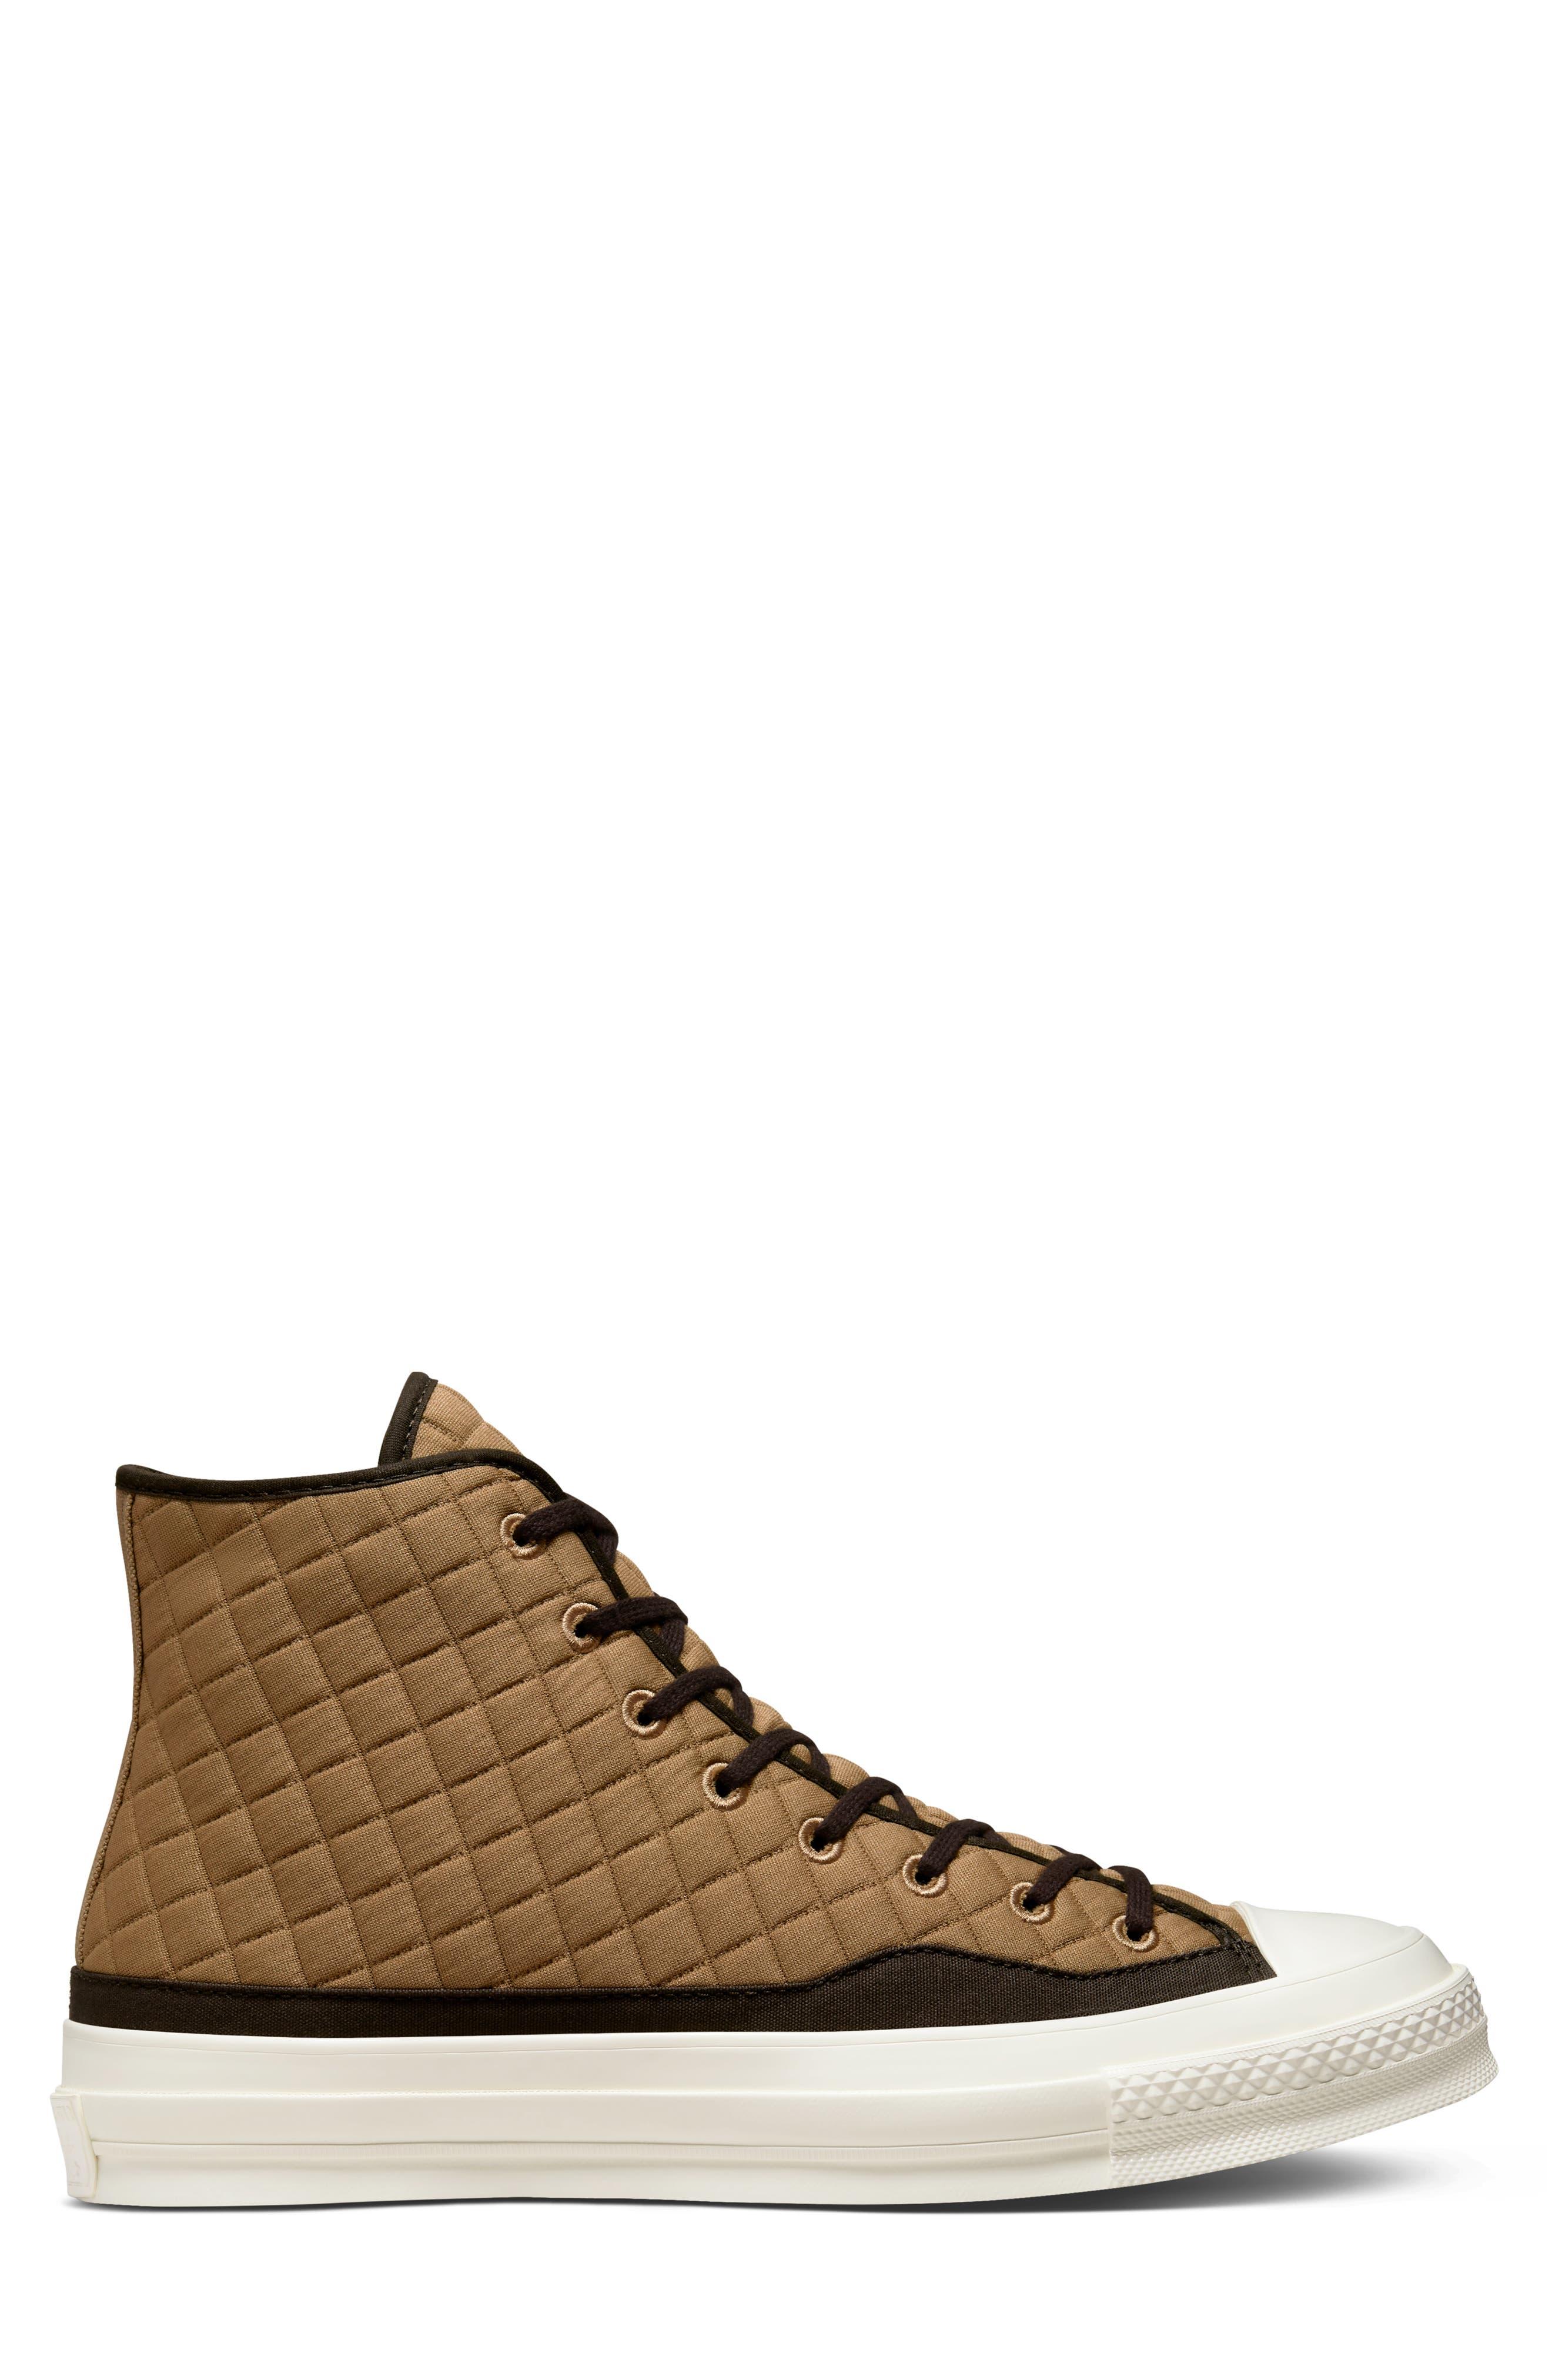 Converse Chuck Taylor® All Star® 70 Hi Faux Fur Lined Sneaker in Brown |  Lyst